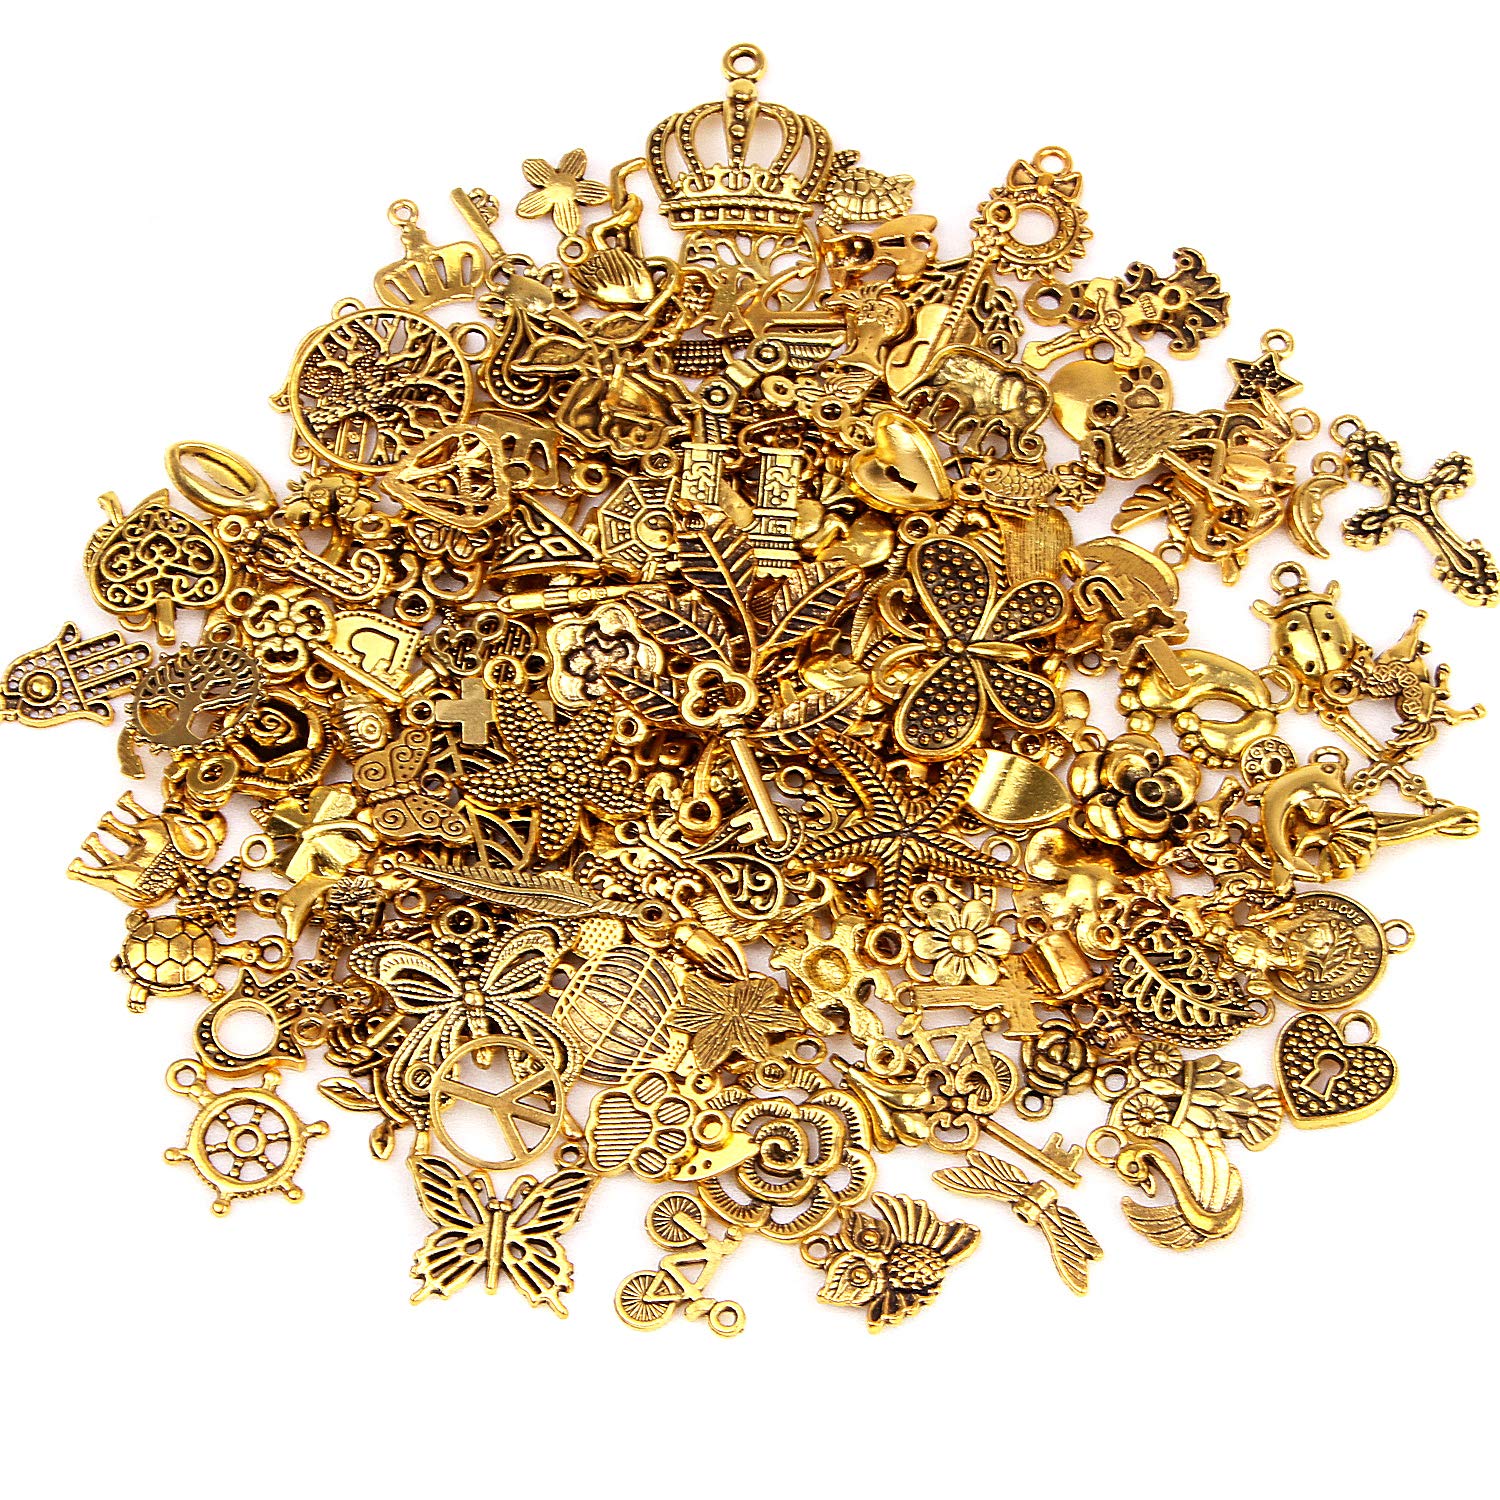 SANNIX 200Pcs Gold Charms Bulk Antique Gold Charms for Jewelry Making Charm Bracelet Necklace Earrings DIY Craft Making